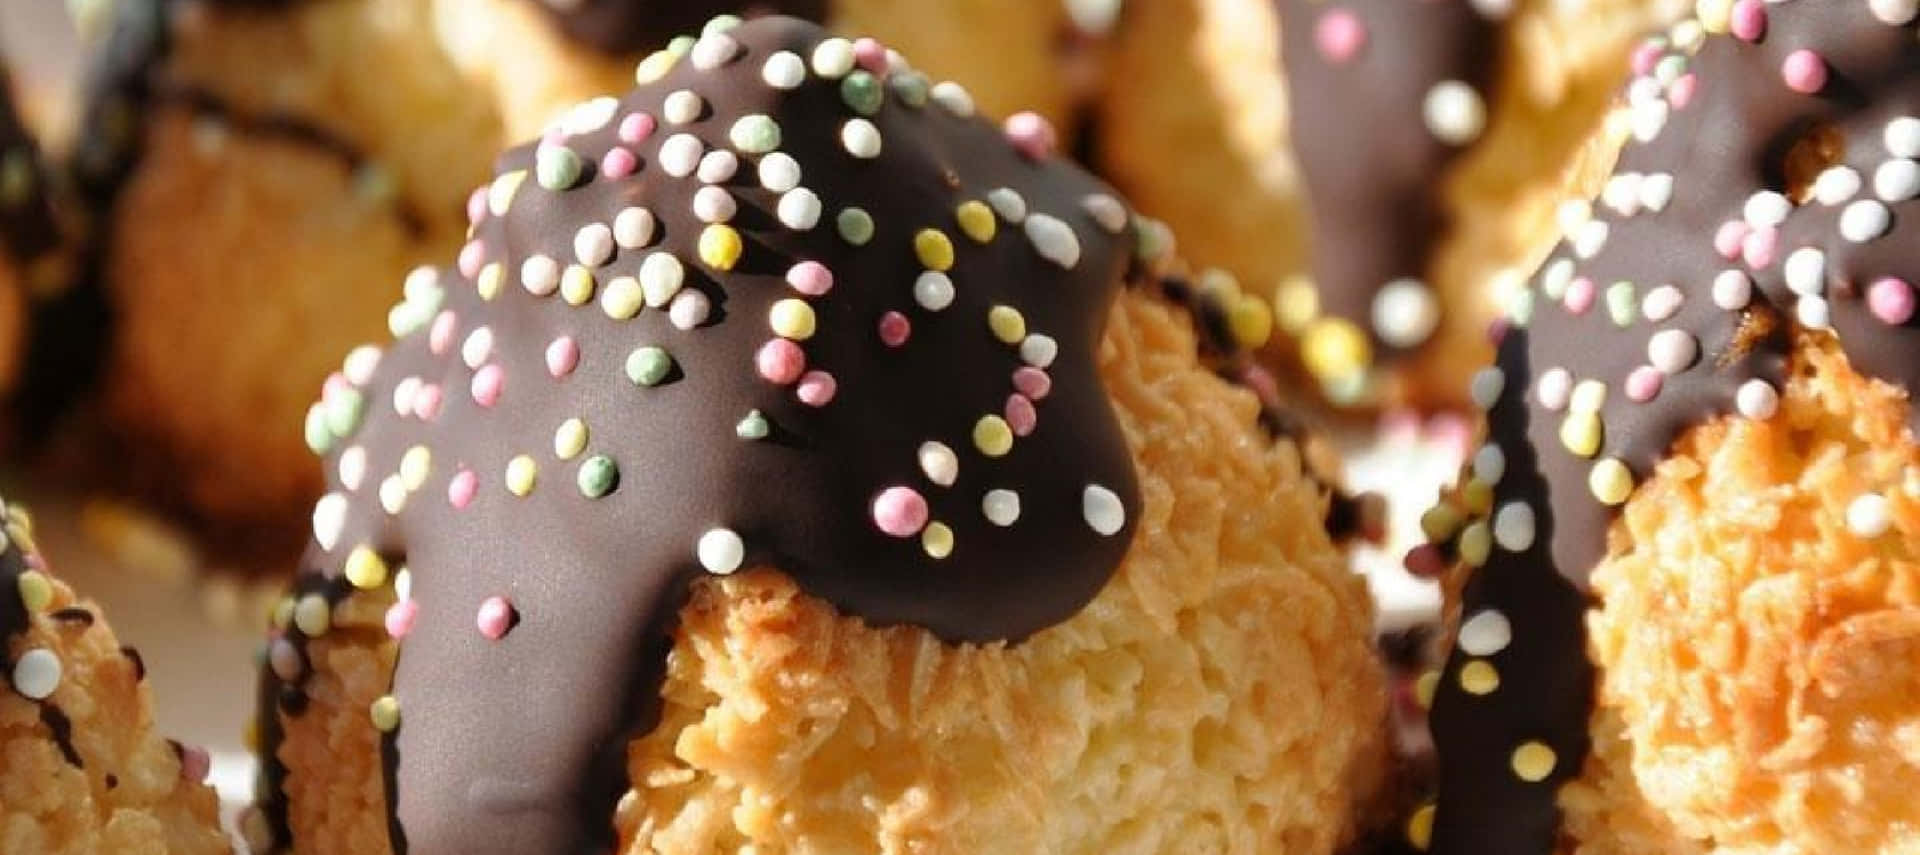 A Plate Of Chocolate Covered Pastries With Sprinkles